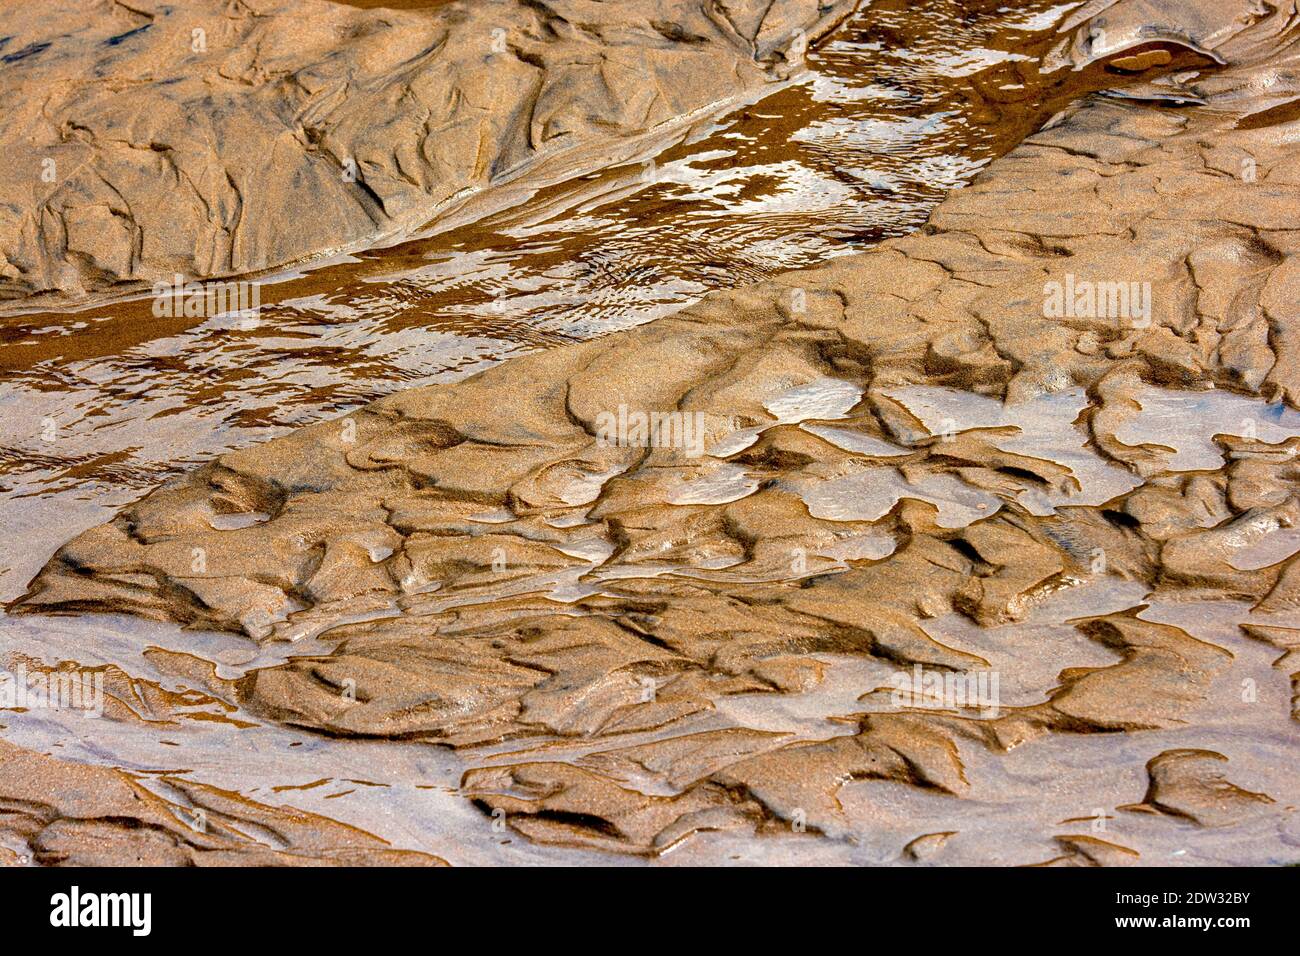 Sand and water up close, background brown Stock Photo